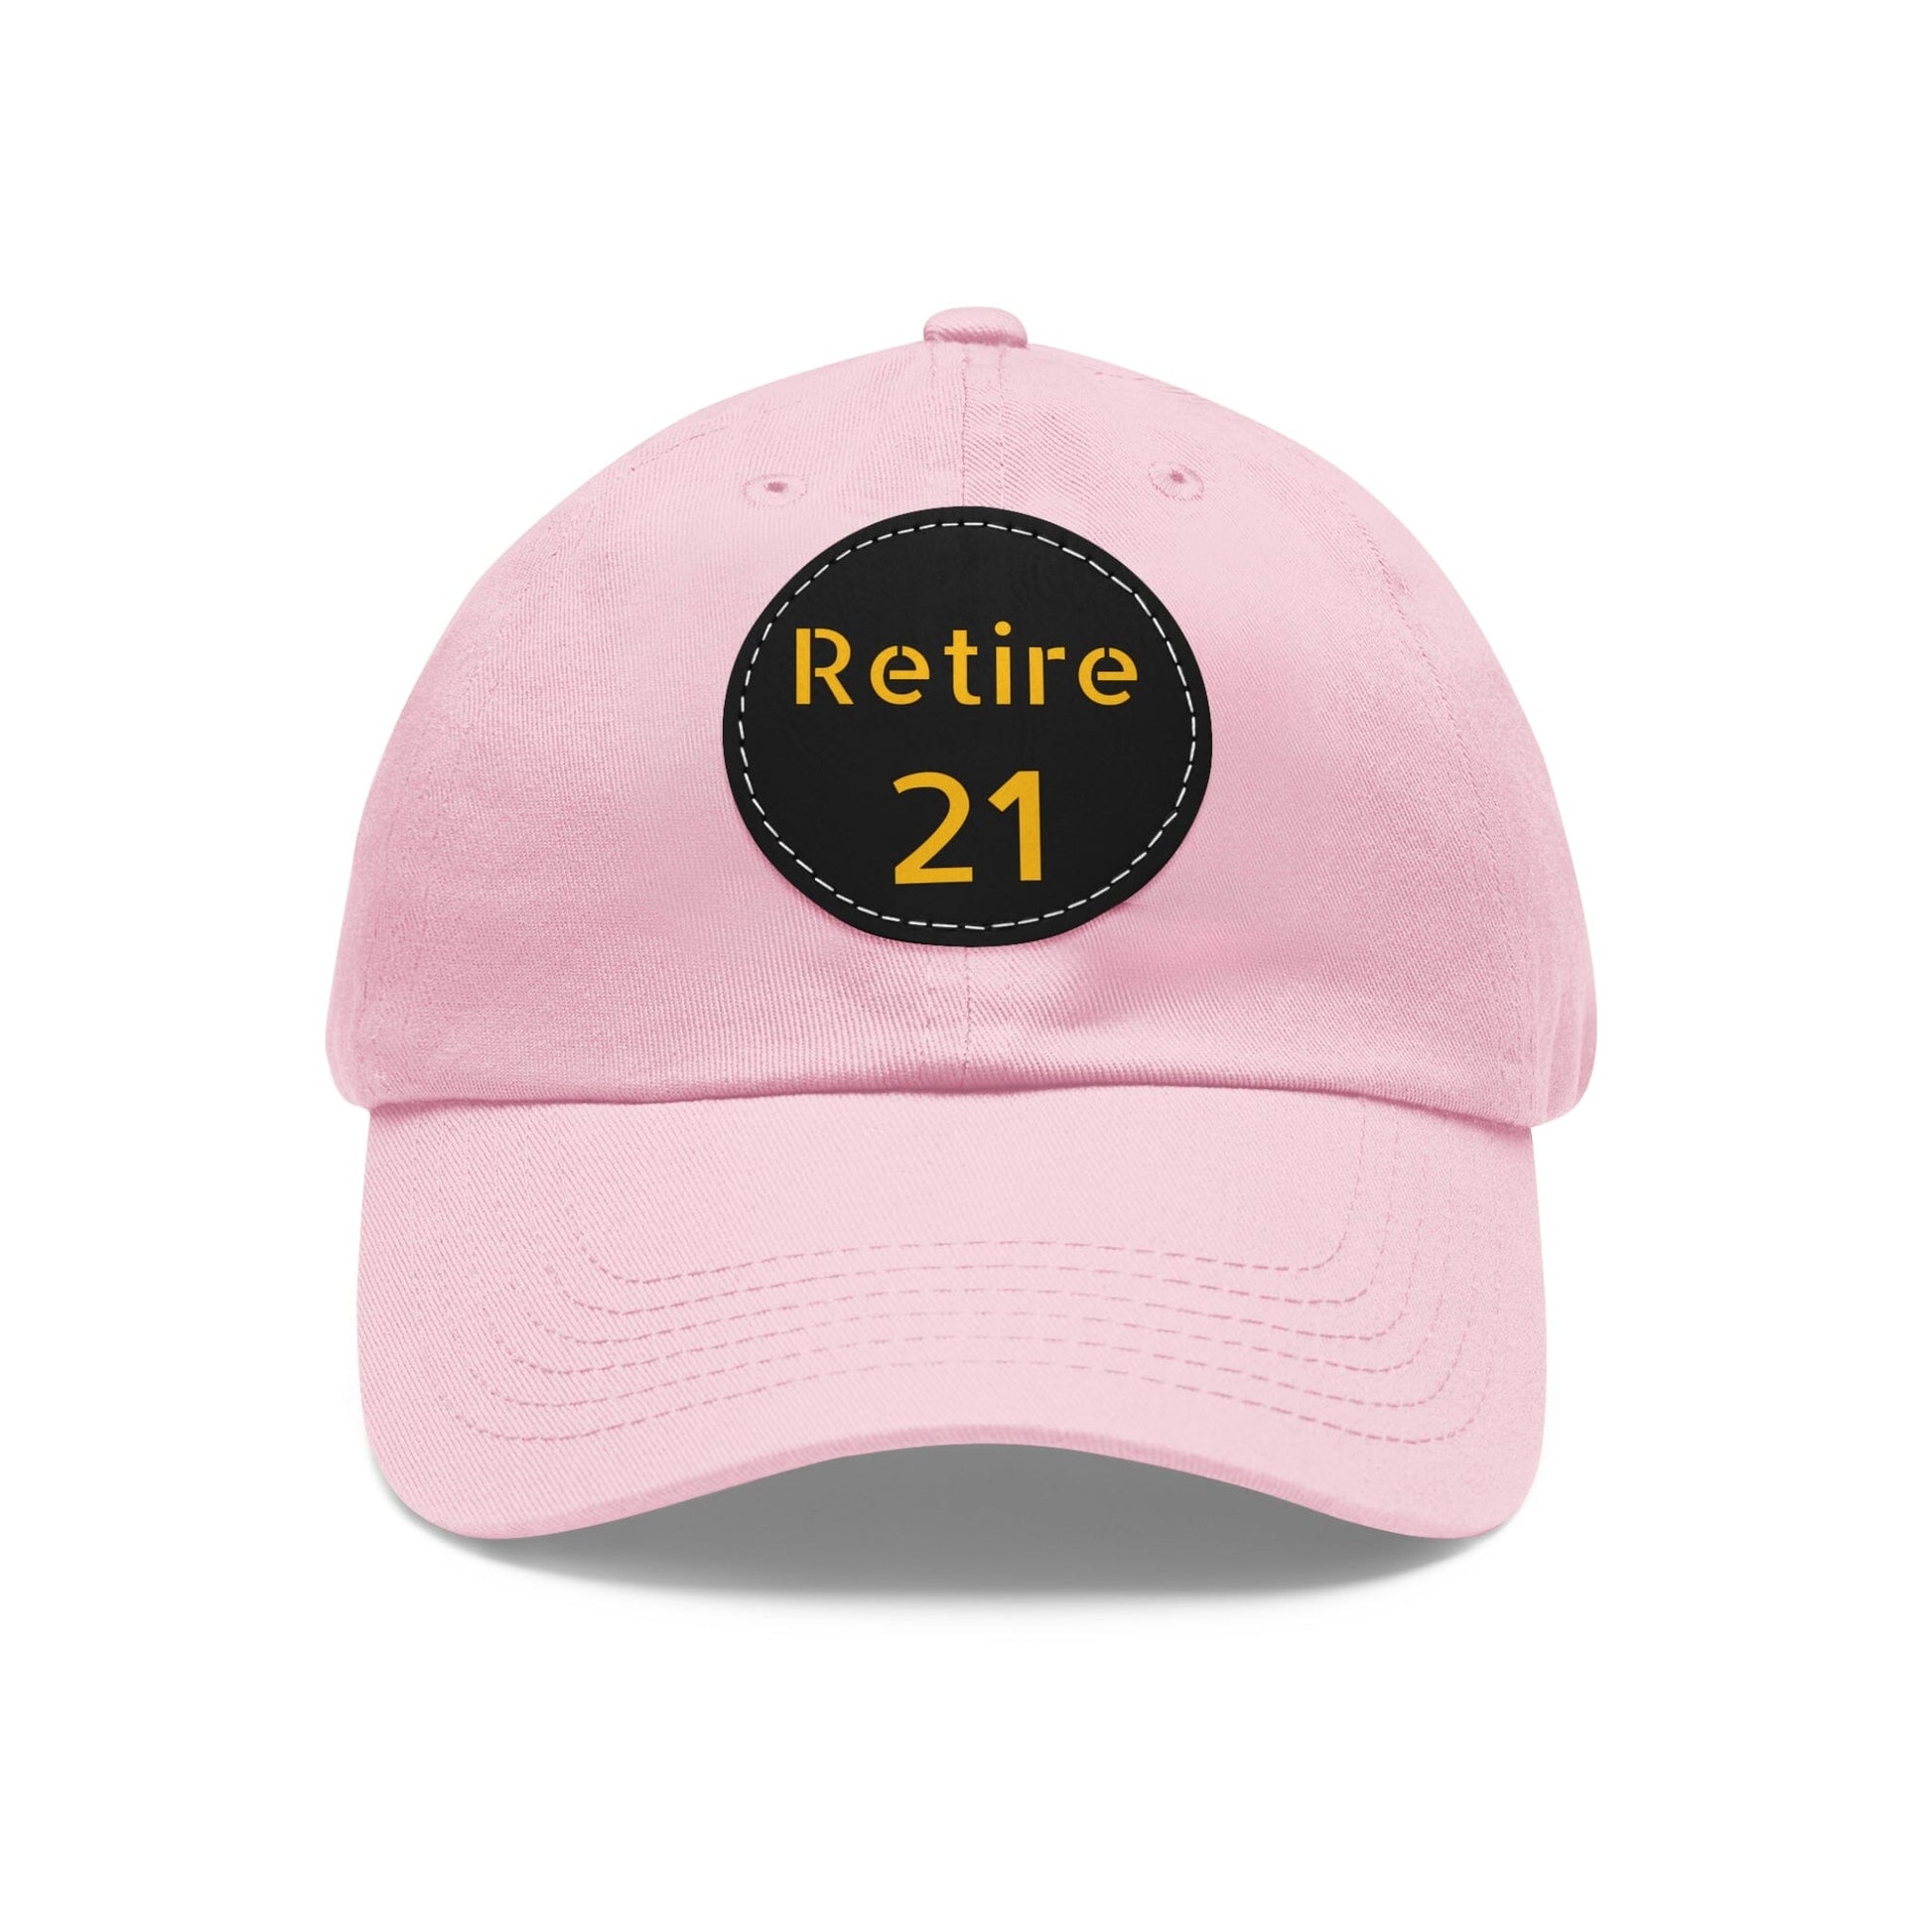 Retire 21 Hat With Leather Patch Hats Yinzergear Light Pink / Black patch Circle One size